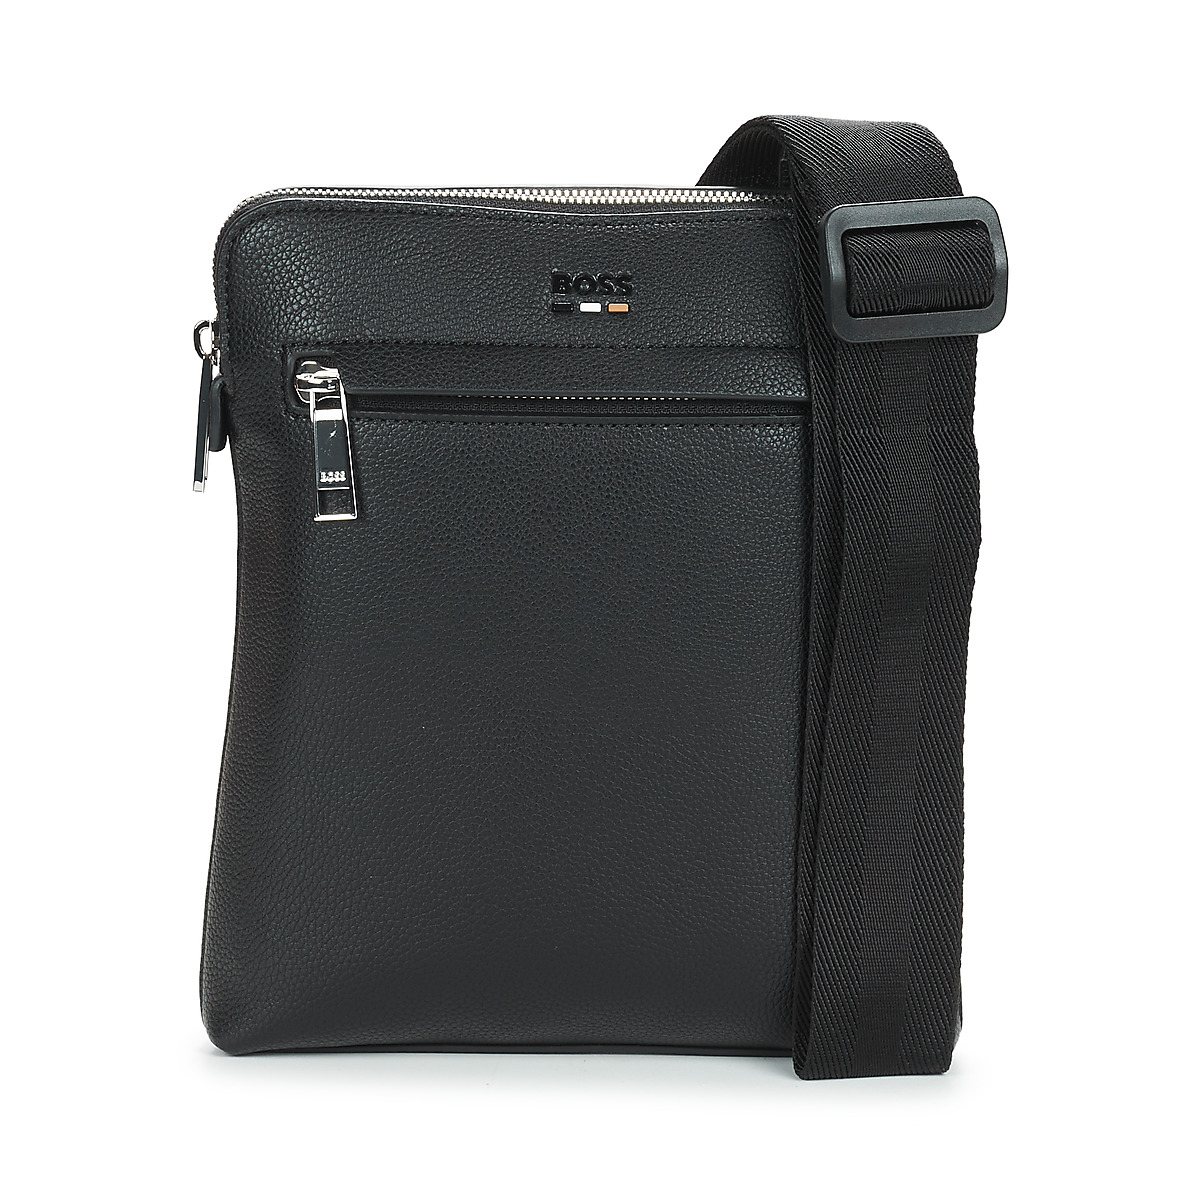 Ray_S BOSS ! | 109,00 Clutches Europe - / Men Black € Fast zip Bags delivery Spartoo - Pouches env